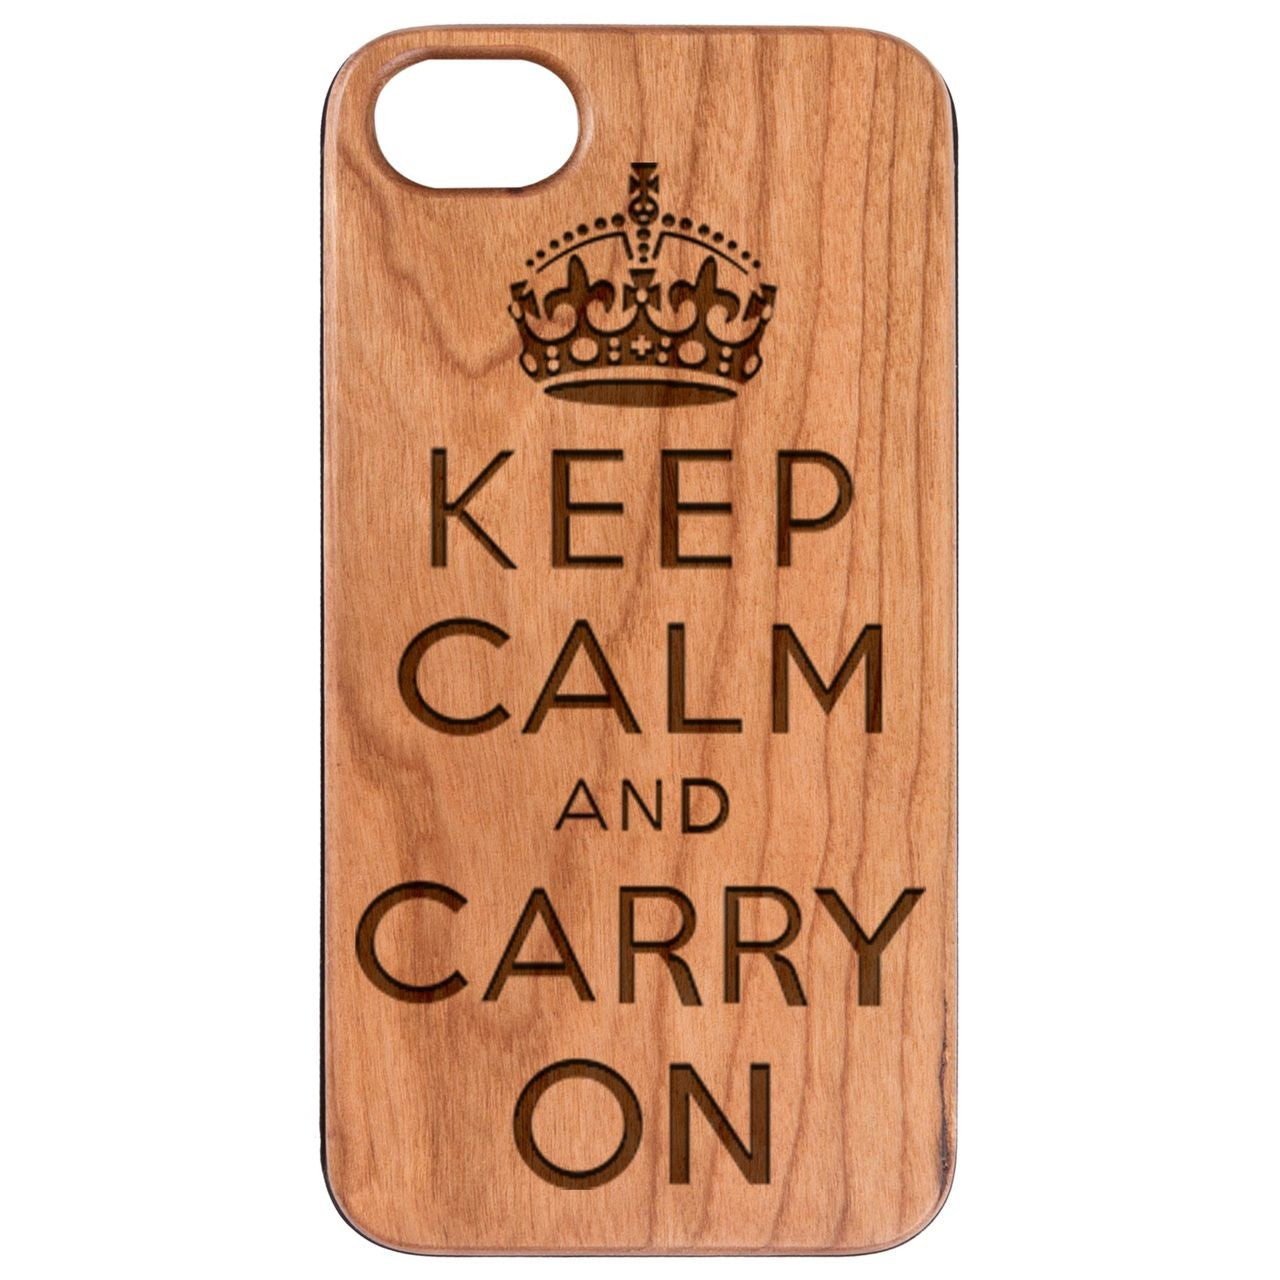  Keep Calm And Carry On - Engraved - Wooden Phone Case - IPhone 13 Models